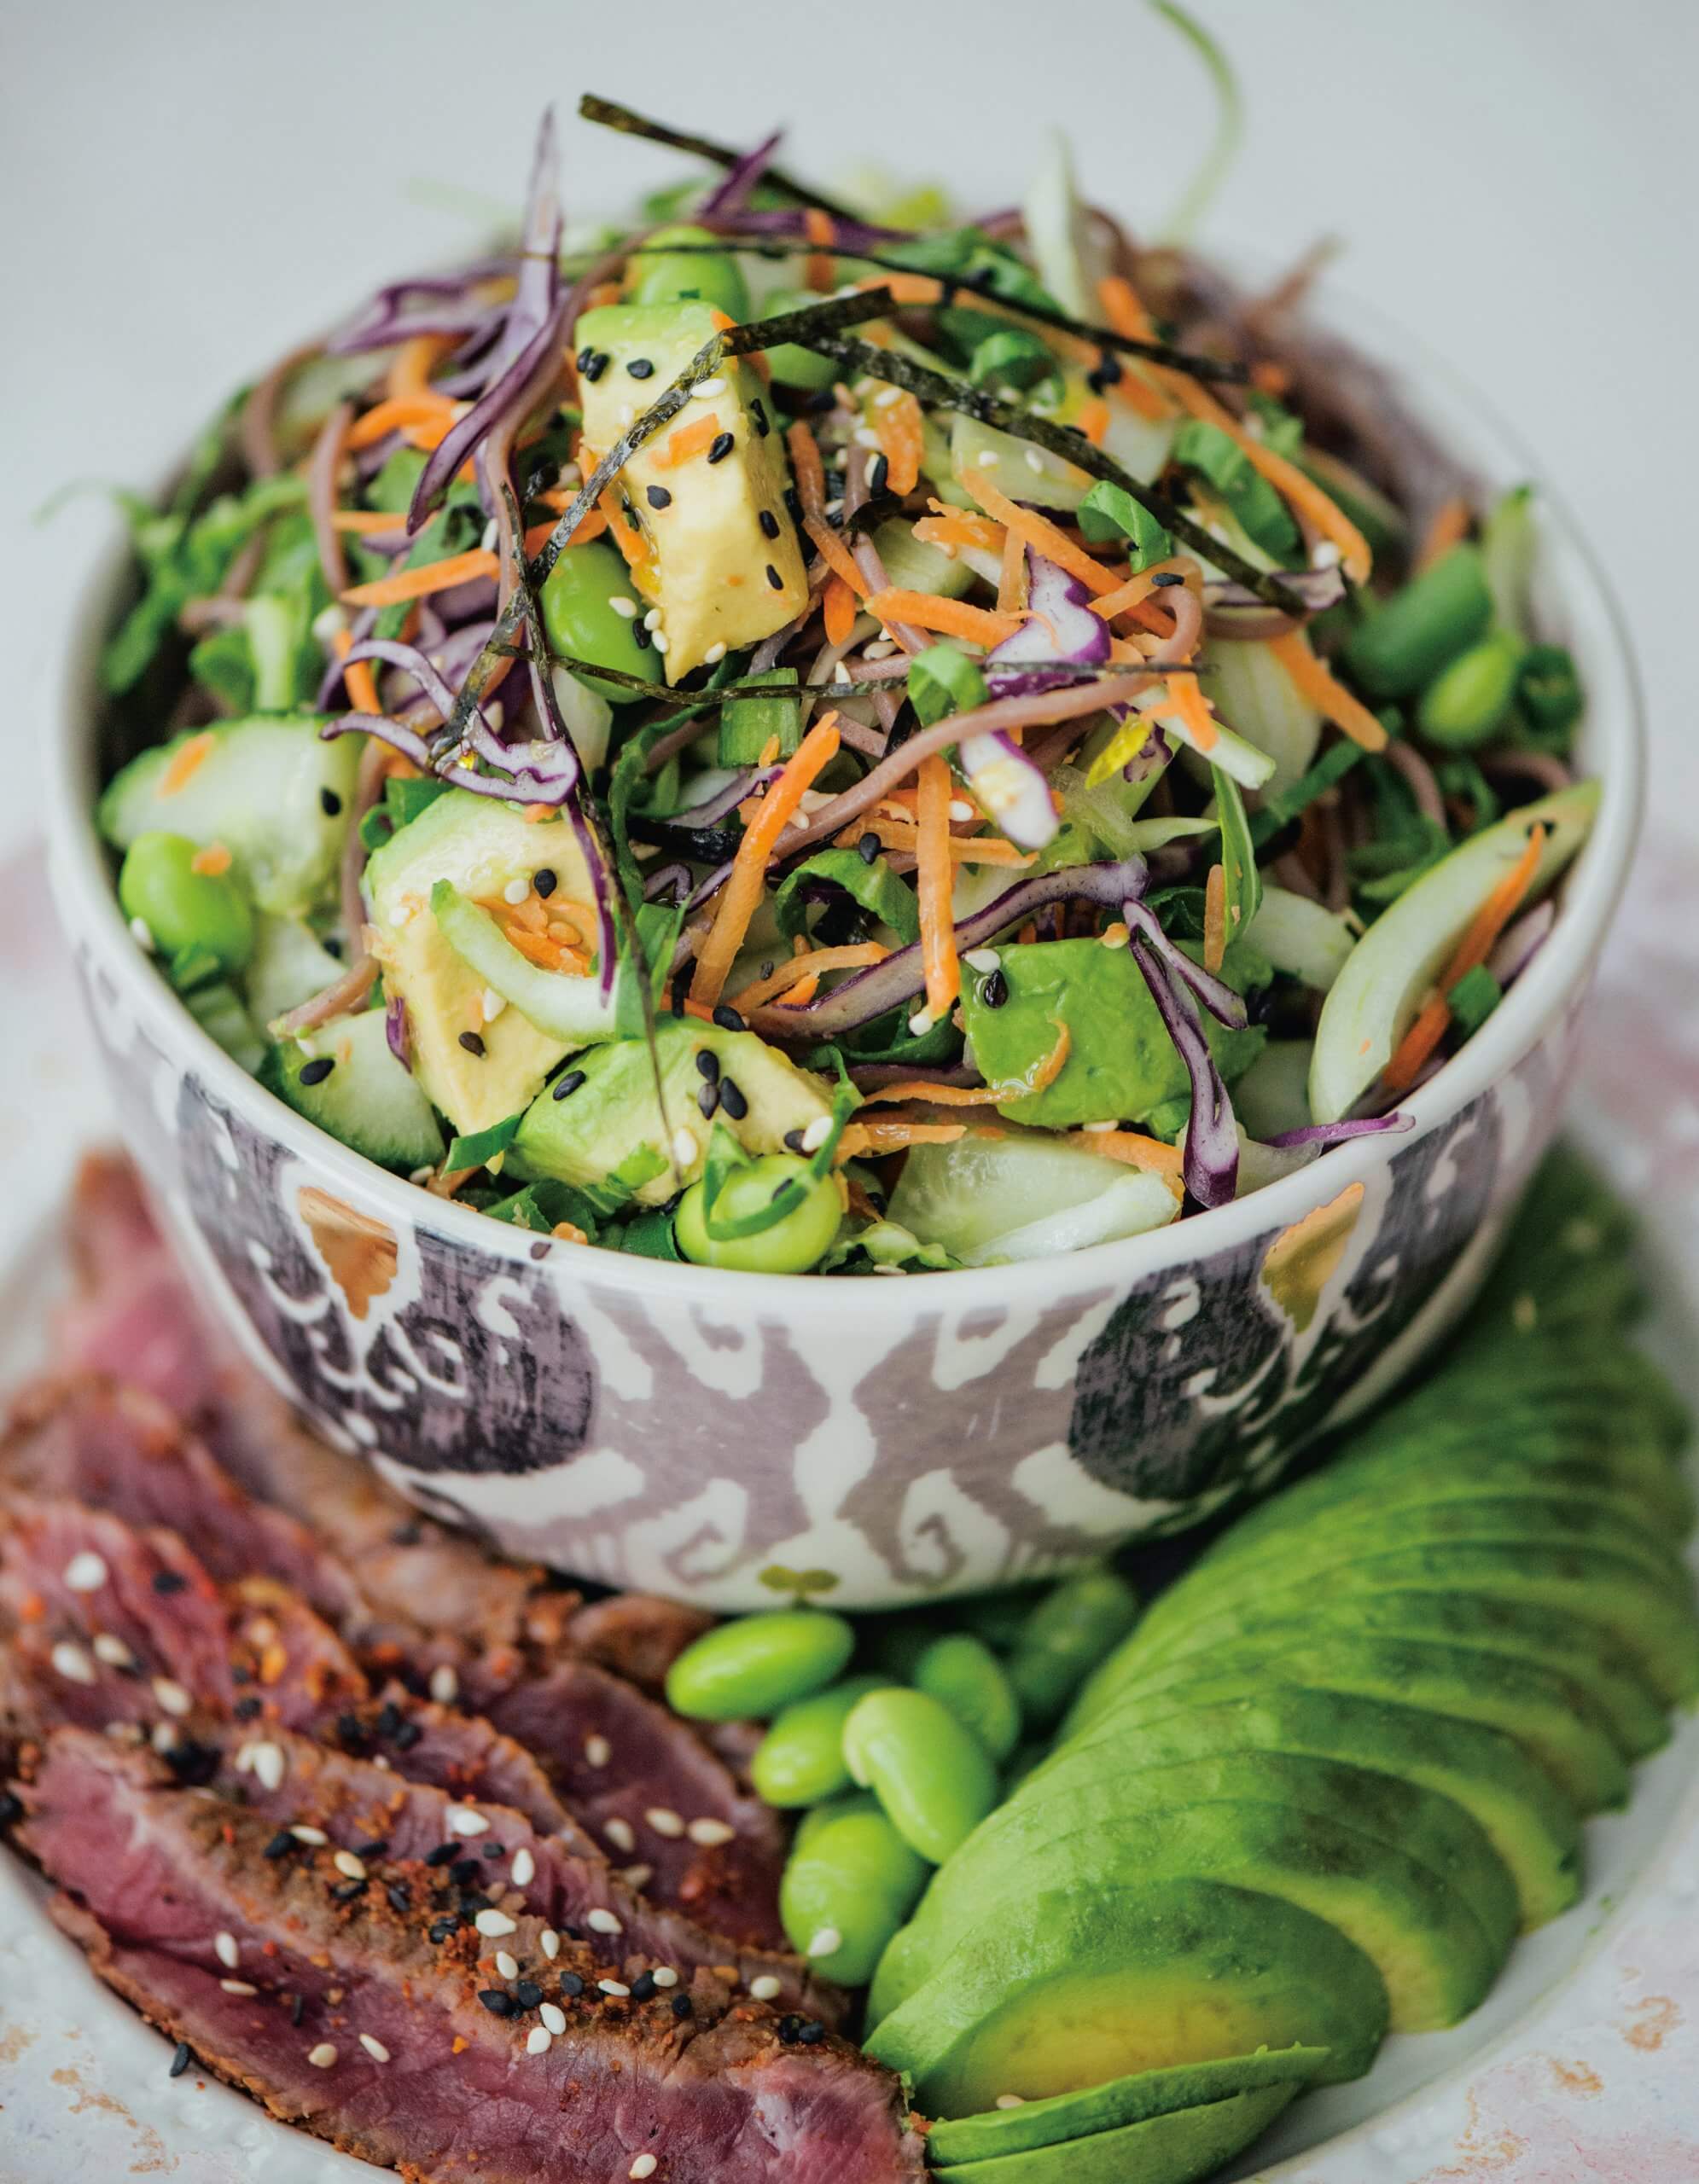 A bowl of salad with steak and avocado